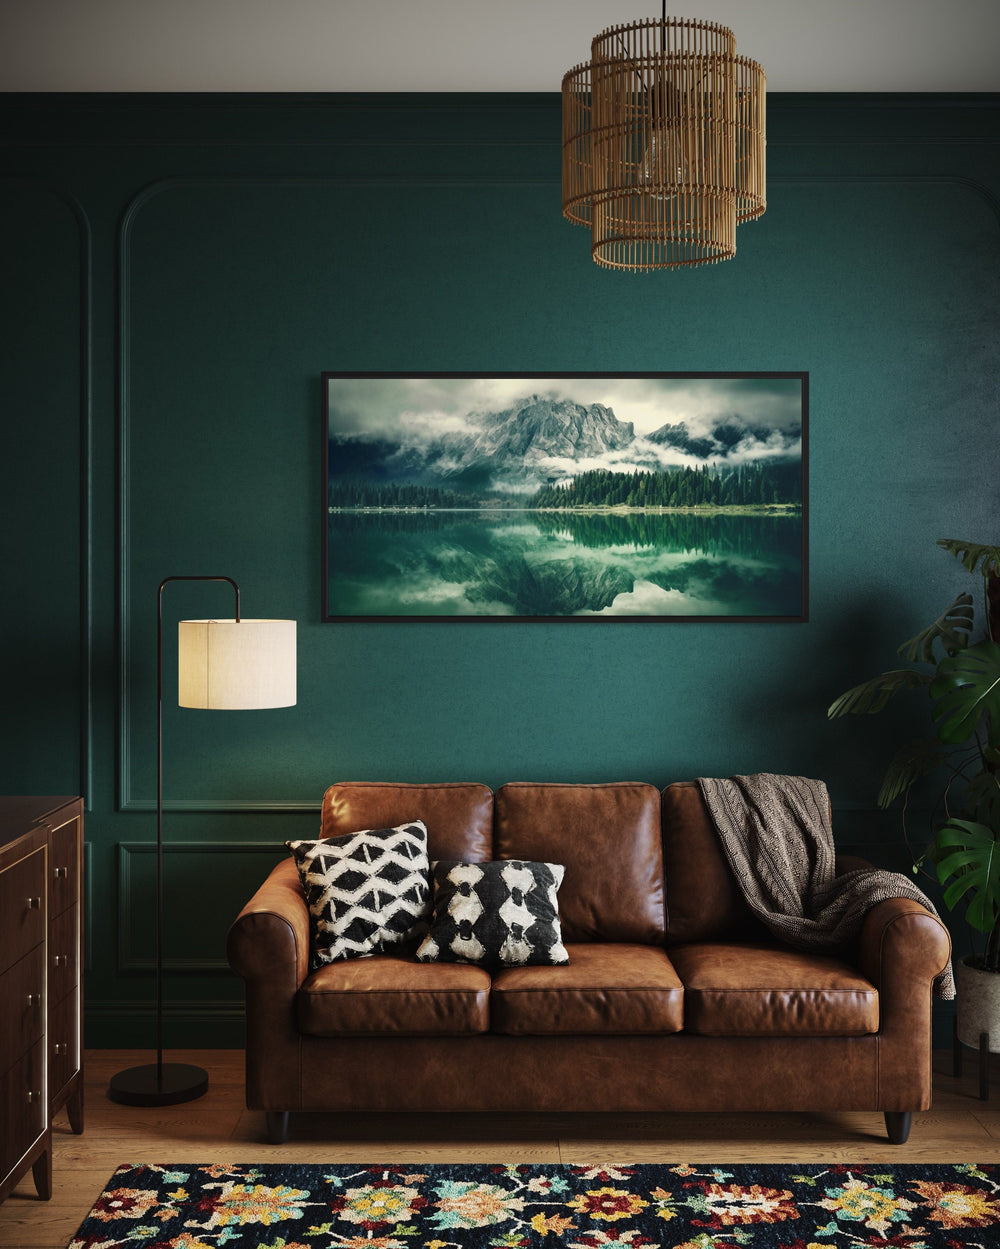 Emerald Green Nature Mirror Lake And Mountains Landscape Wall Art in living room